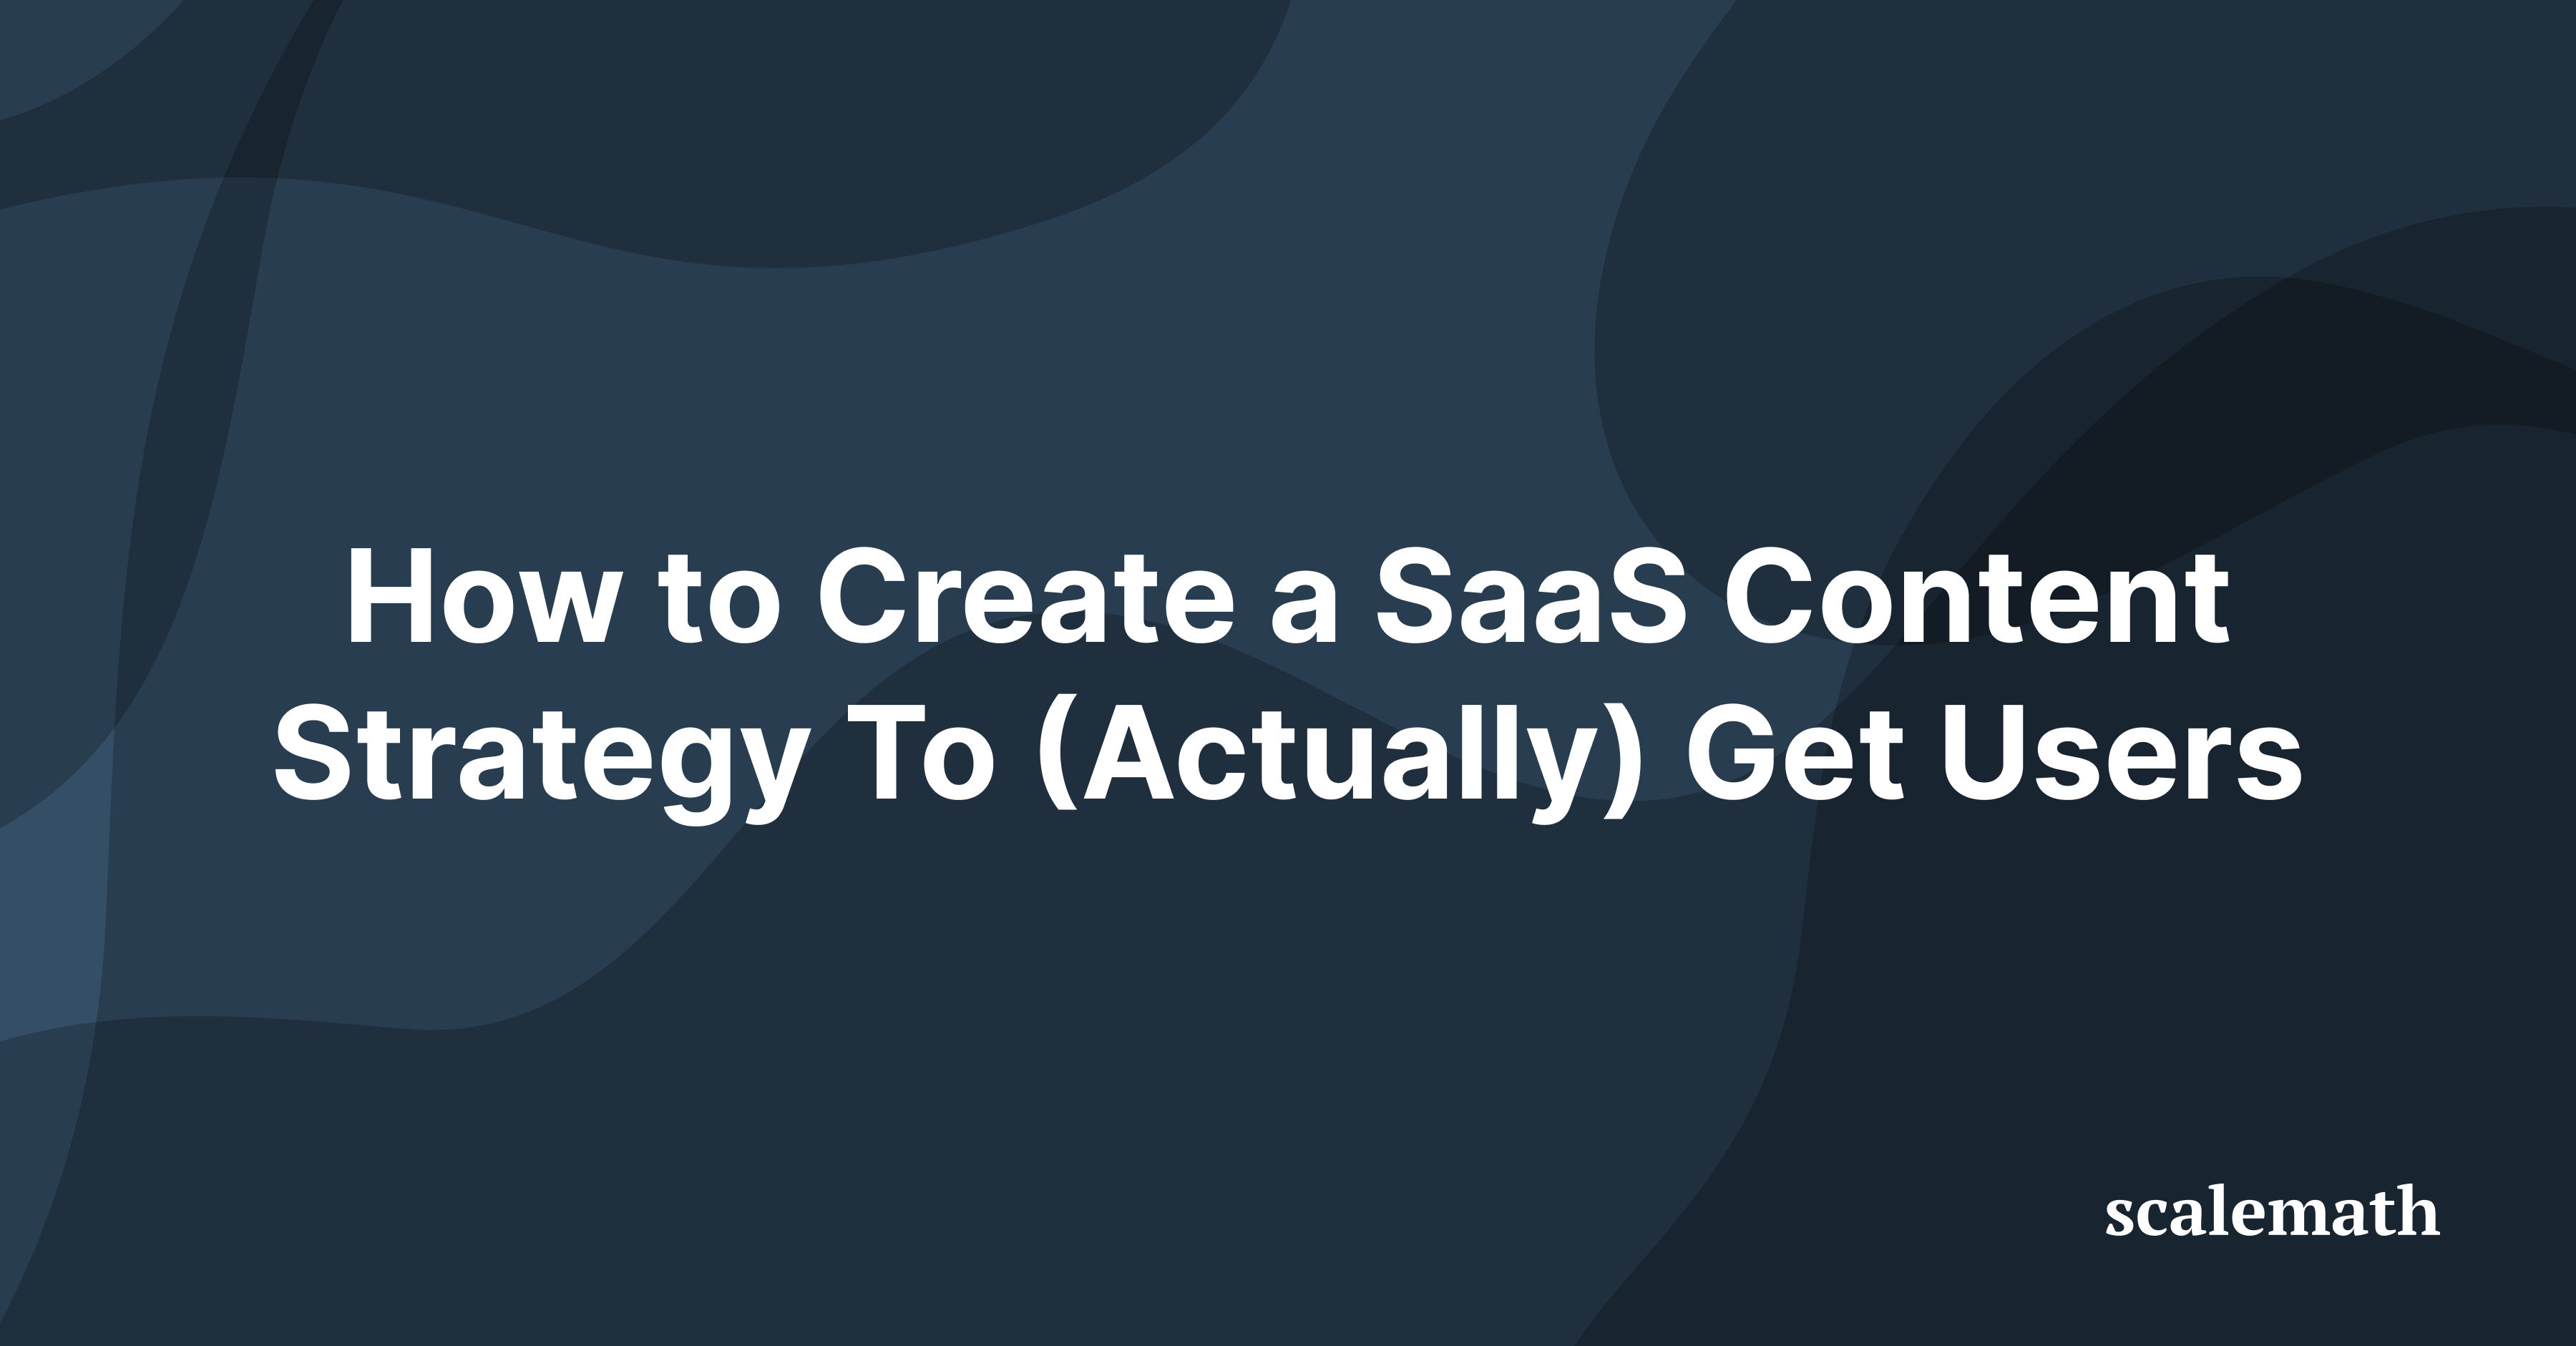 How to Create a SaaS Content Strategy To (Actually) Get Users